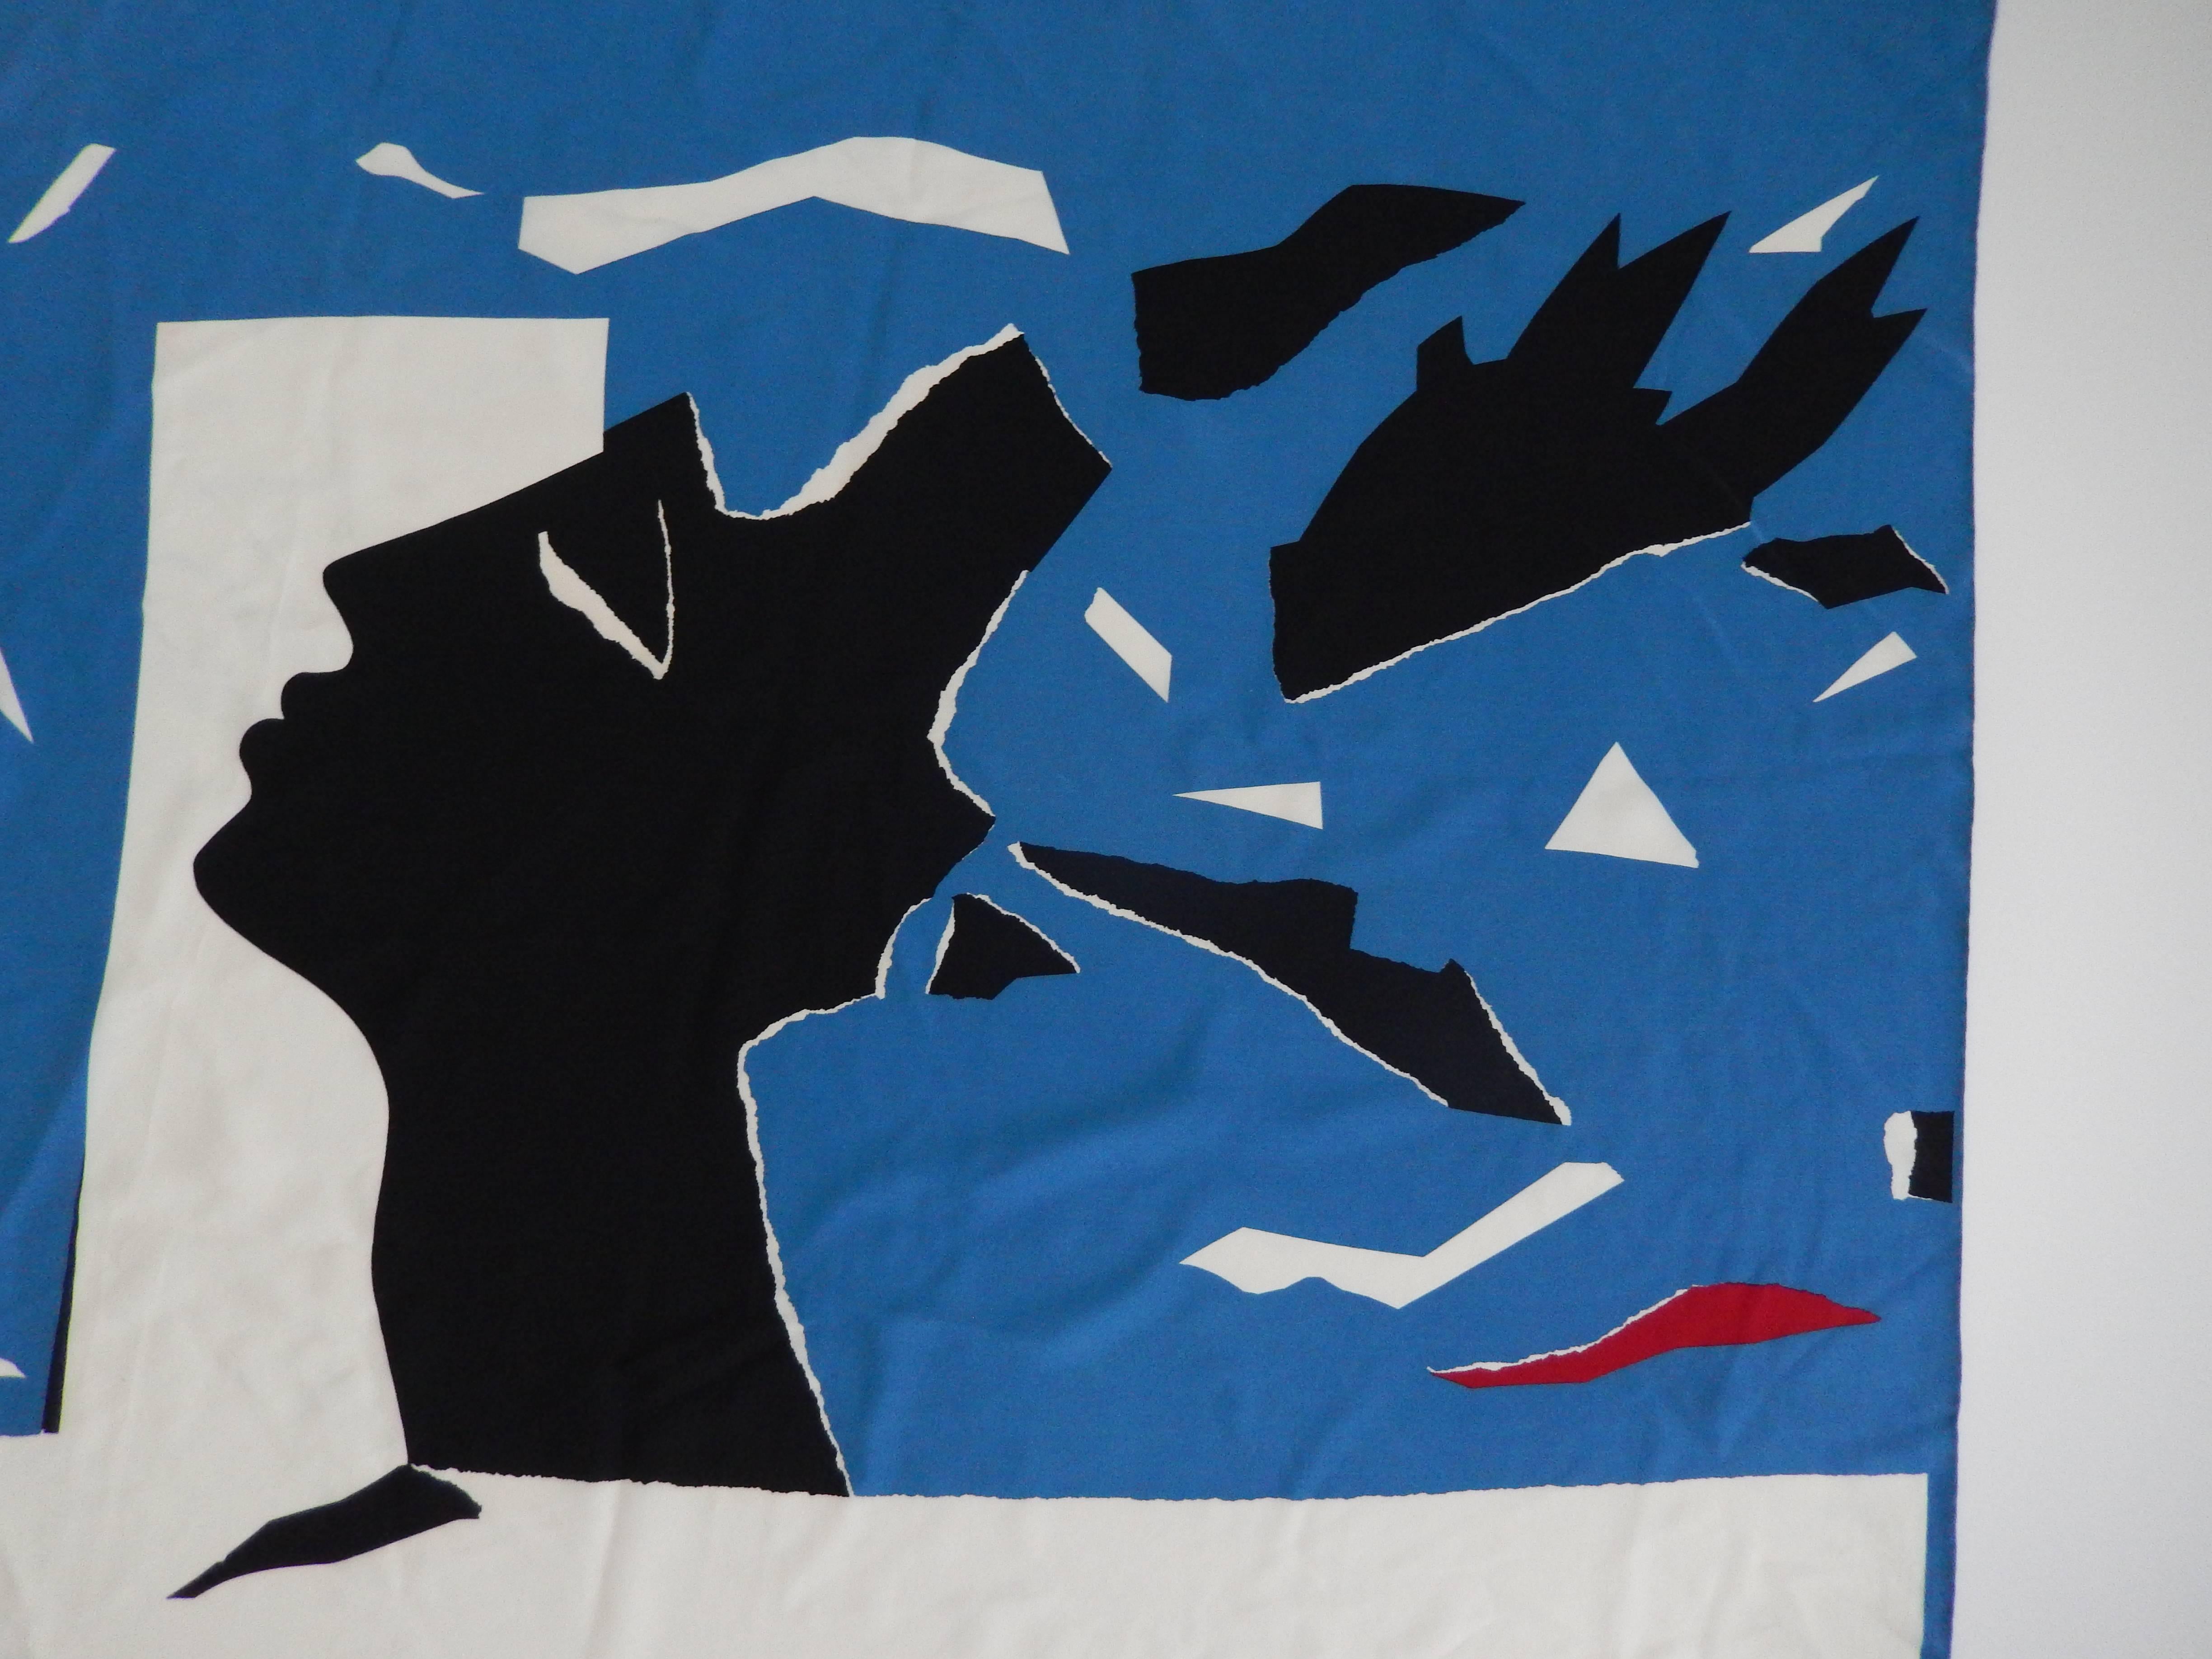 A chic red, white, and French Blue silk scarf by Yves Saint Laurent titled L'Hiver (Winter).  This scarf was created in conjunction with an exhibition on the designer at the Metropolitan Museum of Art in 1983.